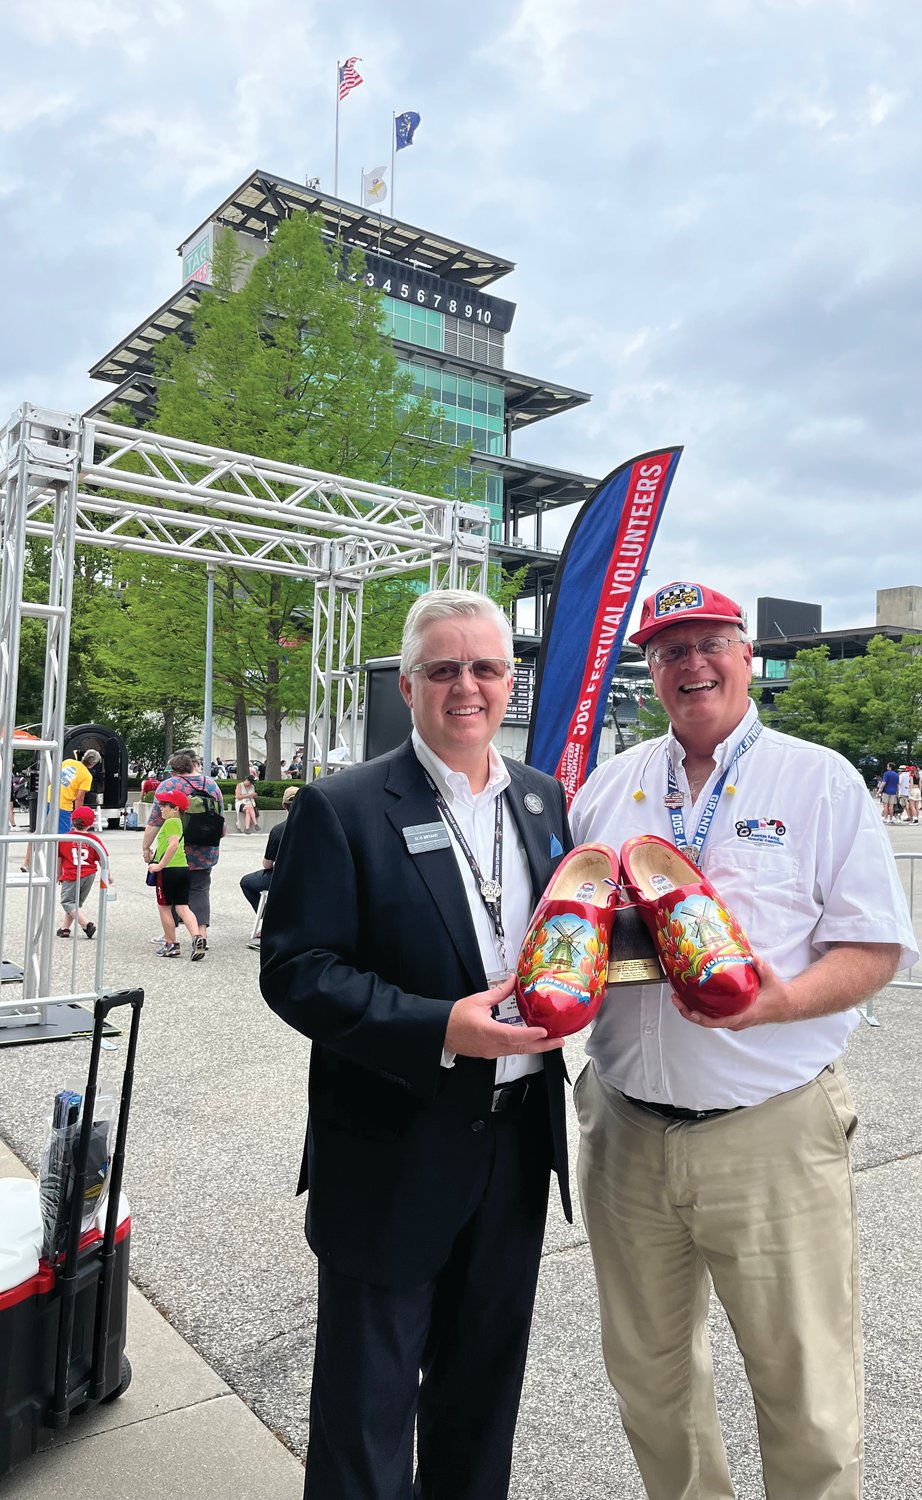 During the 500 Festival Volunteer Program presented by Citizens Energy Group Appreciation Day at the Indianapolis Motor Speedway, 500 Festival CEO Bob Bryant and AES 500 Festival Parade Co-Chair Mark Eutsler hold a plaque containing a pair of wooden shoes like those worn by members of the Holland, Michigan HS Marching Dutchman Band to commemorate Eutsler’s more than a quarter-century as parade co-chair and 35 years as a 500 Festival volunteer. Eutsler told Bryant his earliest childhood memories of the parade include the distinct sound of the wooden shoes on the downtown Indianapolis streets and on the Indianapolis Motor Speedway during the Indy 500 Parade of Bands preceding the race each year, and how the sound was muffled when the band marched onto the checkered carpet that covered one block of Pennsylvania Street curb to curb. The Marching Dutchman band has made several appearances in both events since the 1960s.